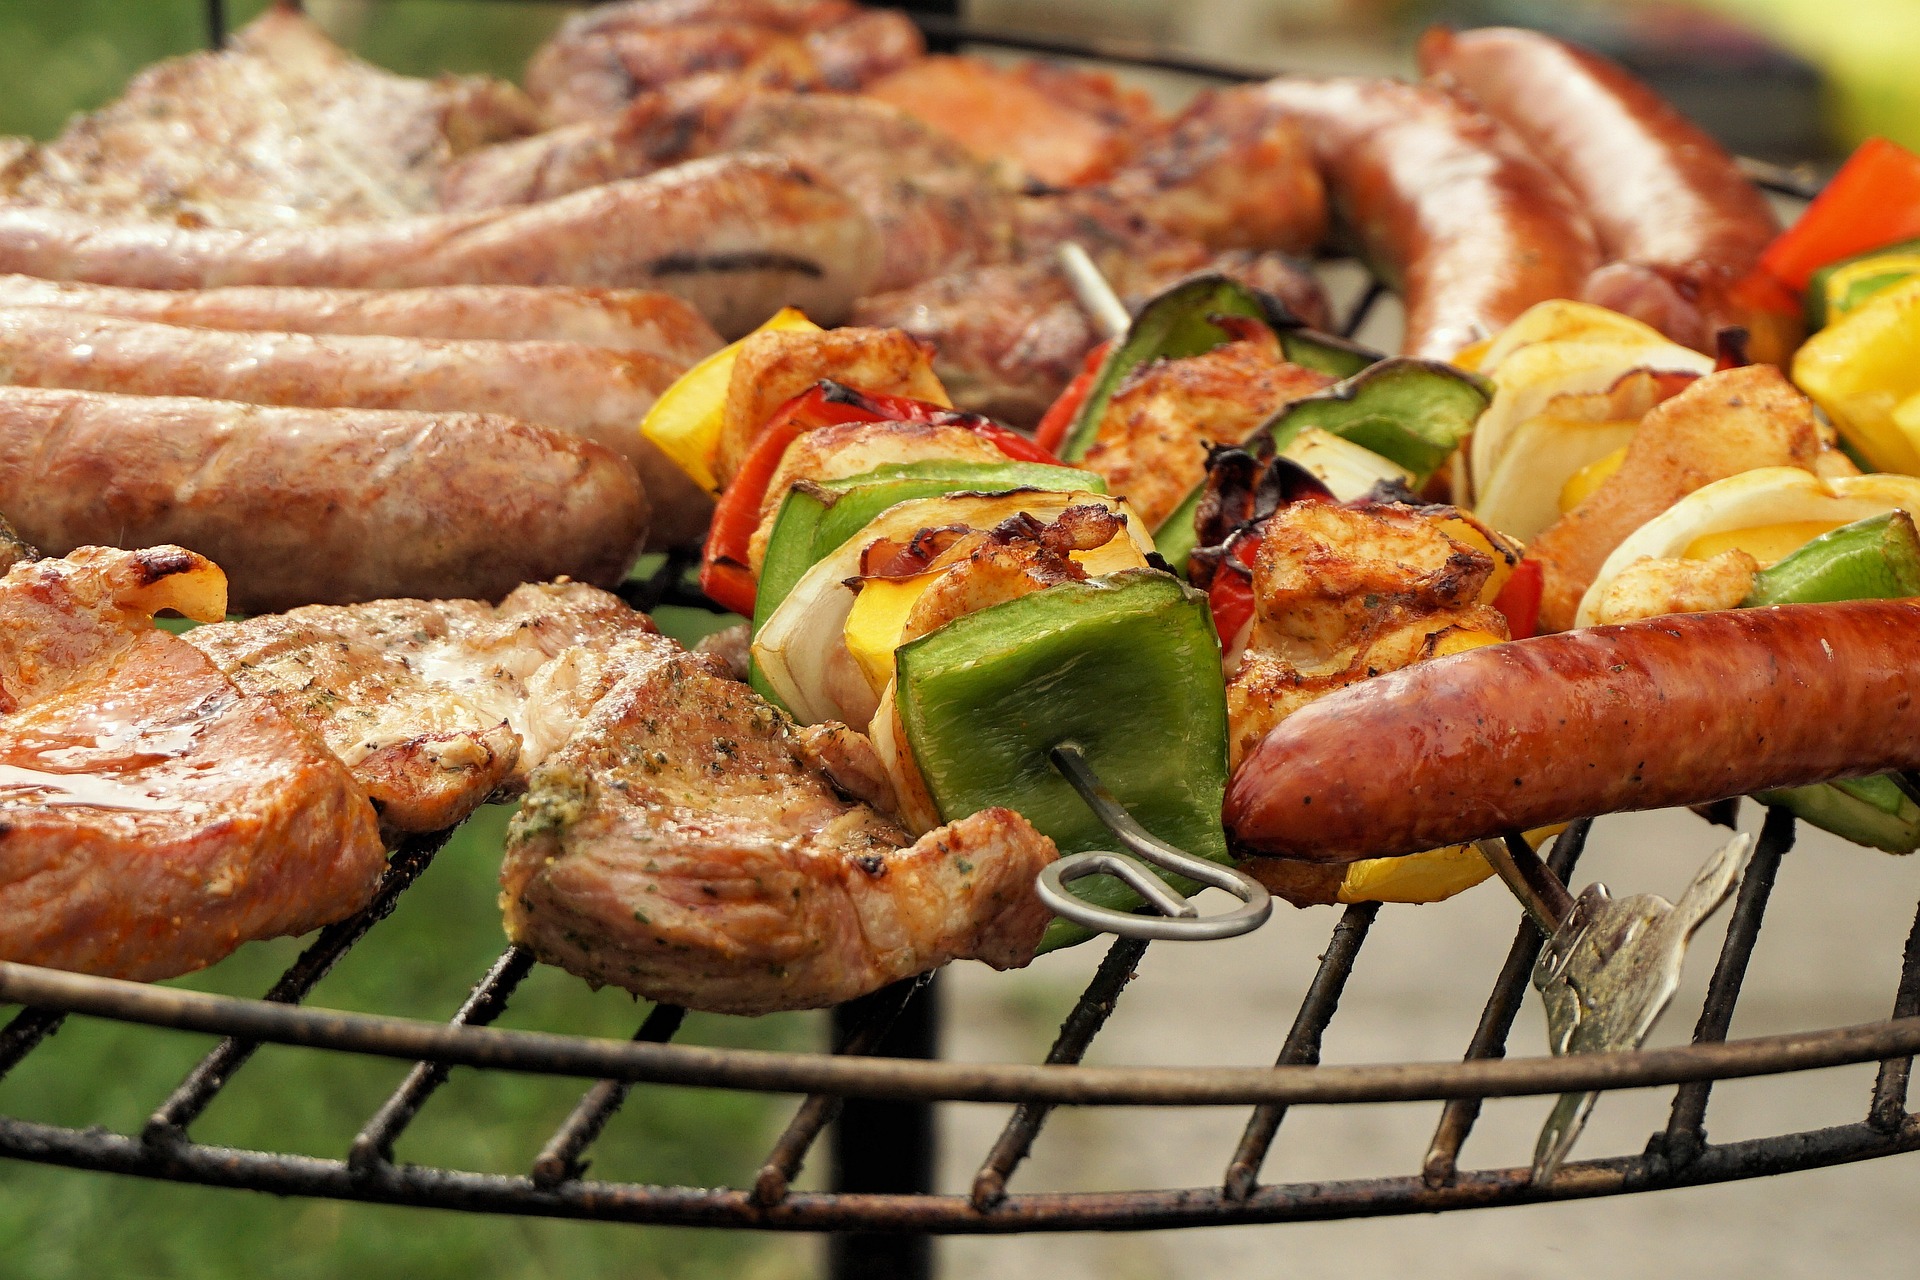 Steaks, Hot Dogs, and Vegetables On a Grill